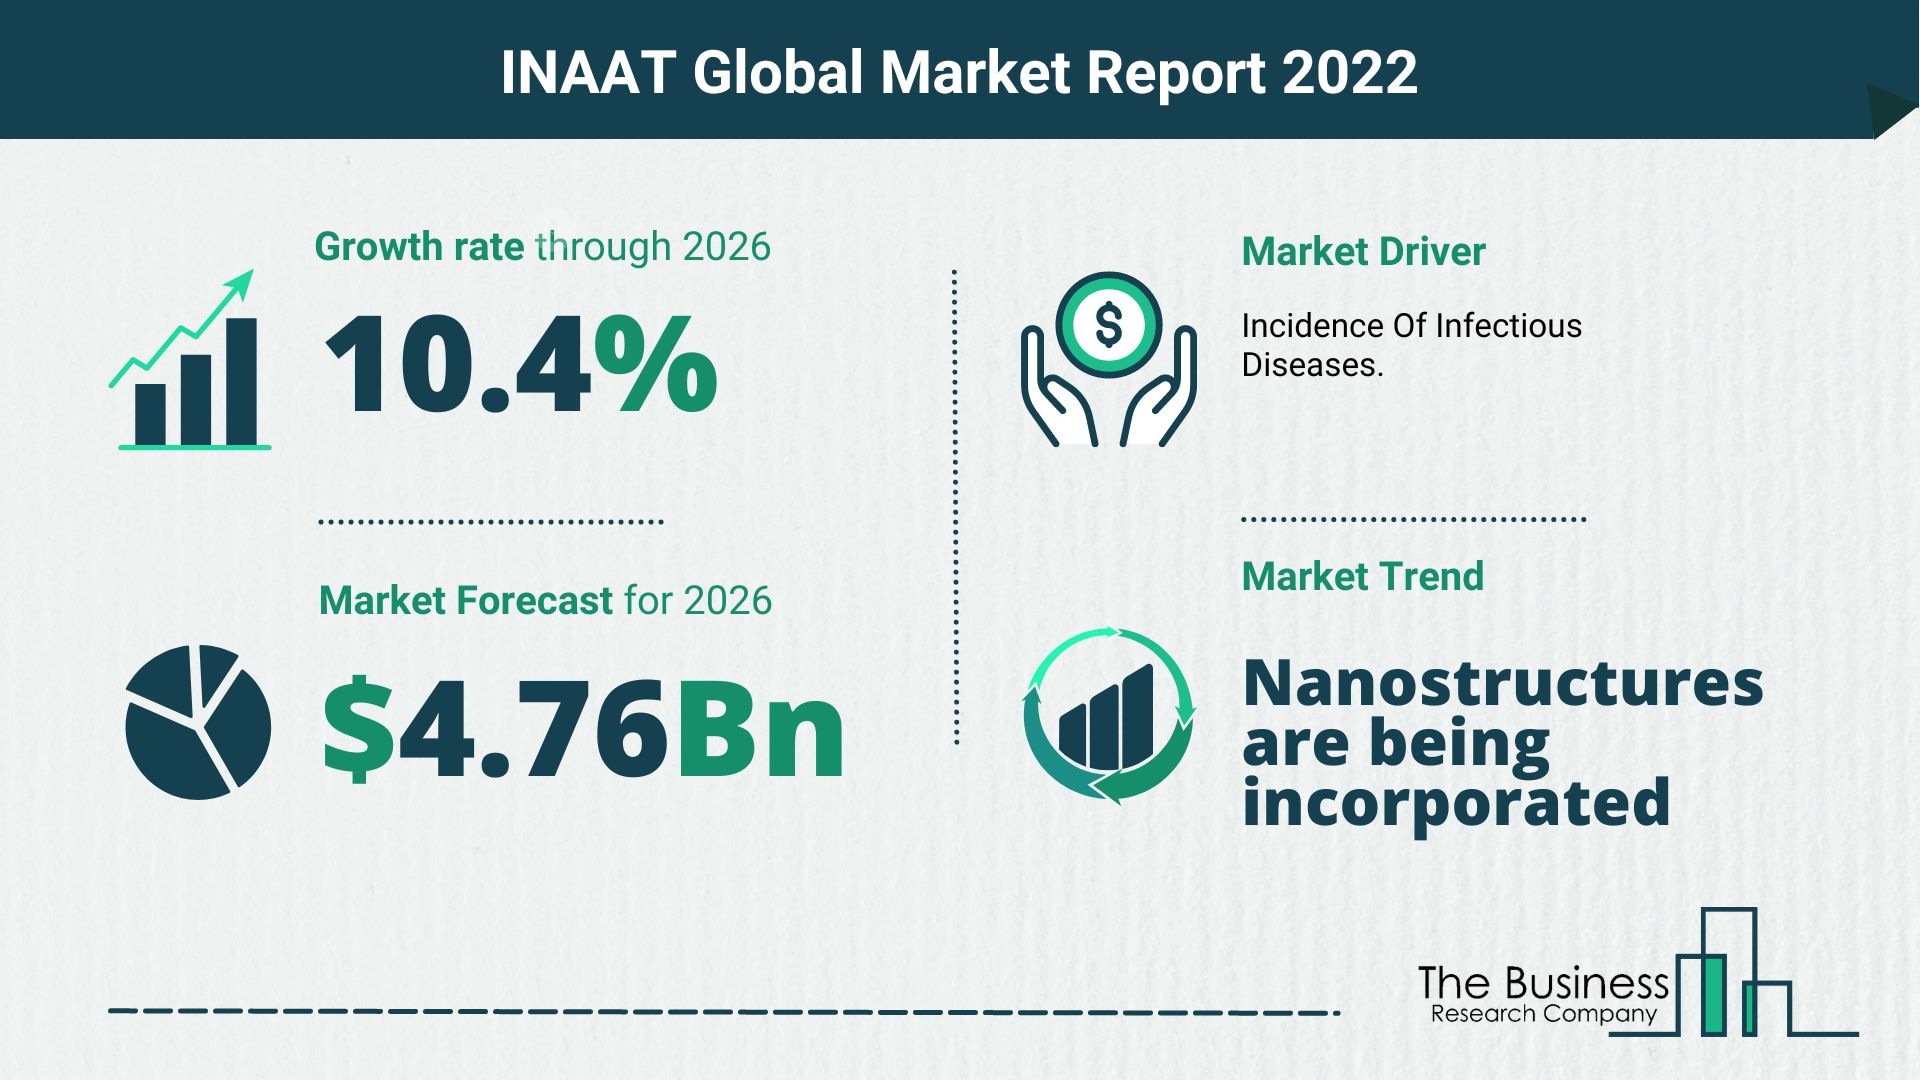 What Is The Isothermal Nucleic Acid Amplification Technology (INAAT) Market Overview In 2022?